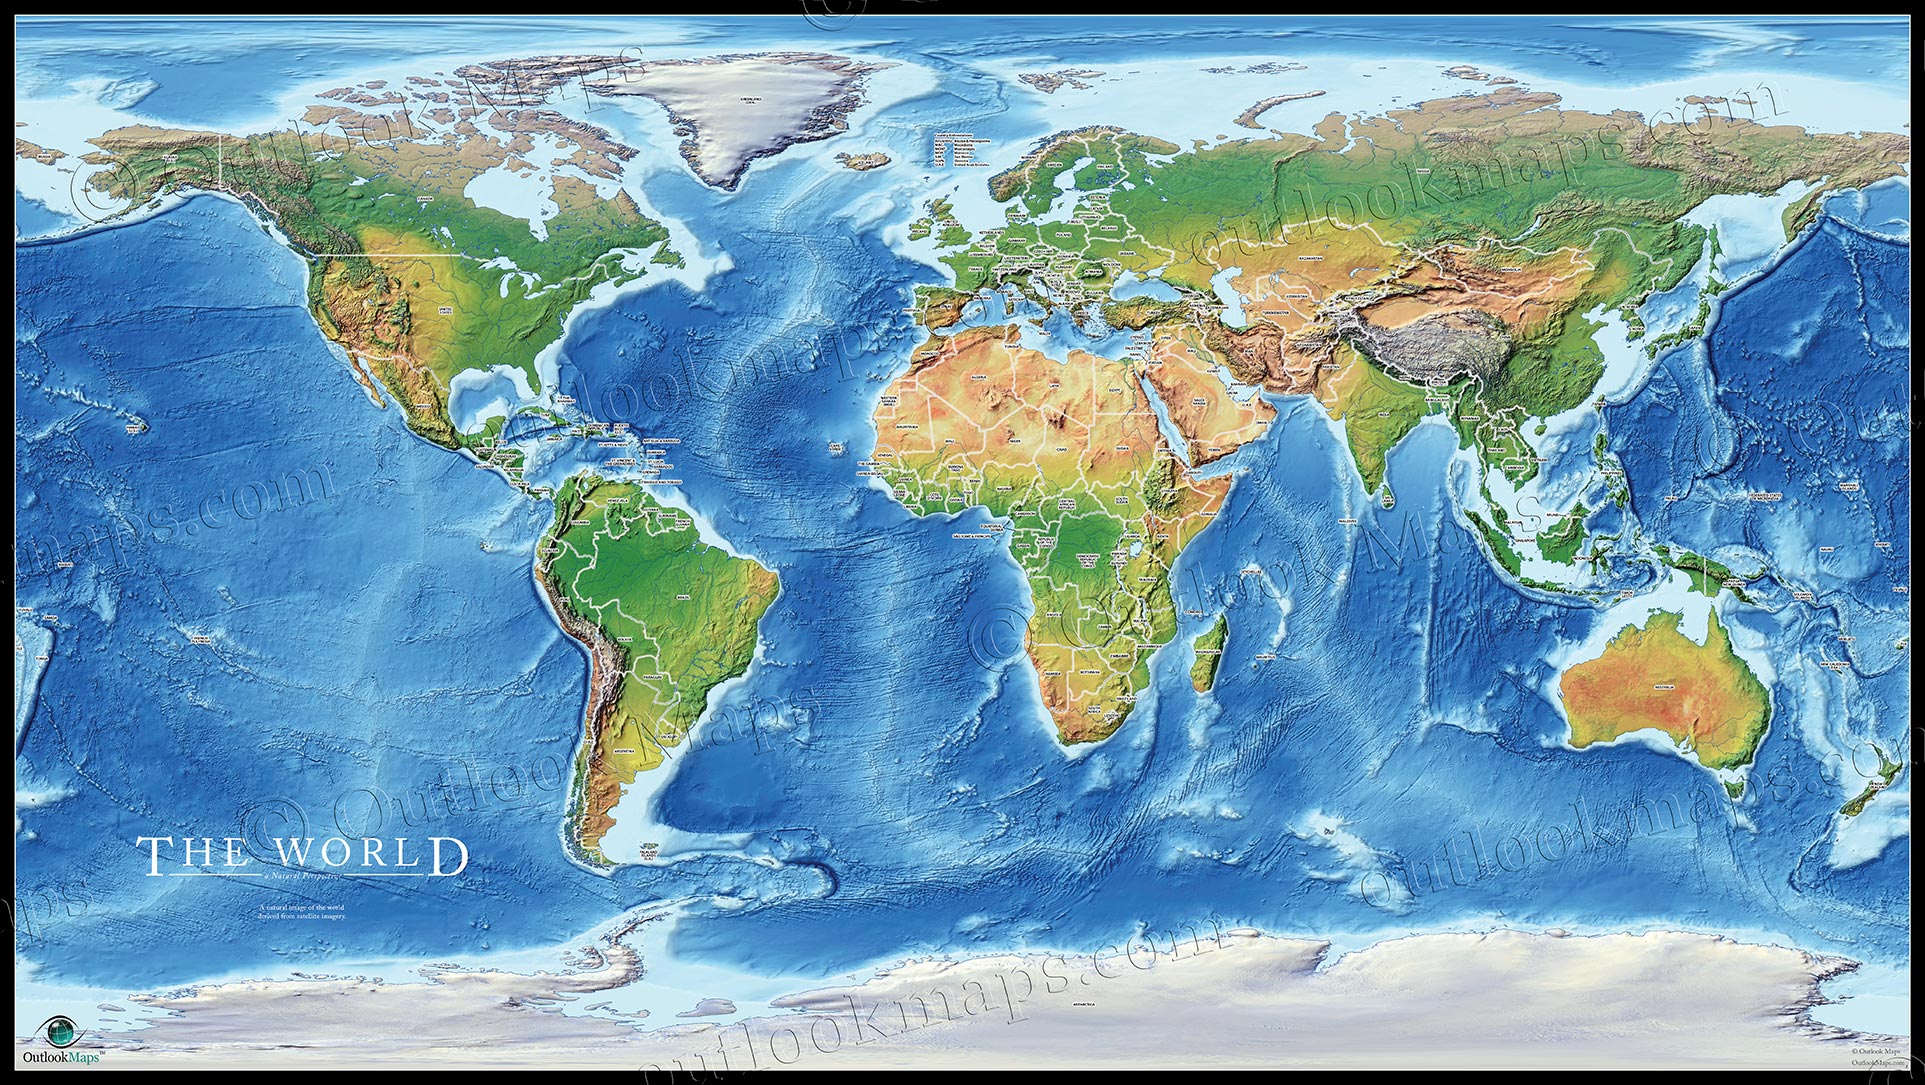 A world map poster that highlights the physical features and natural beauty...